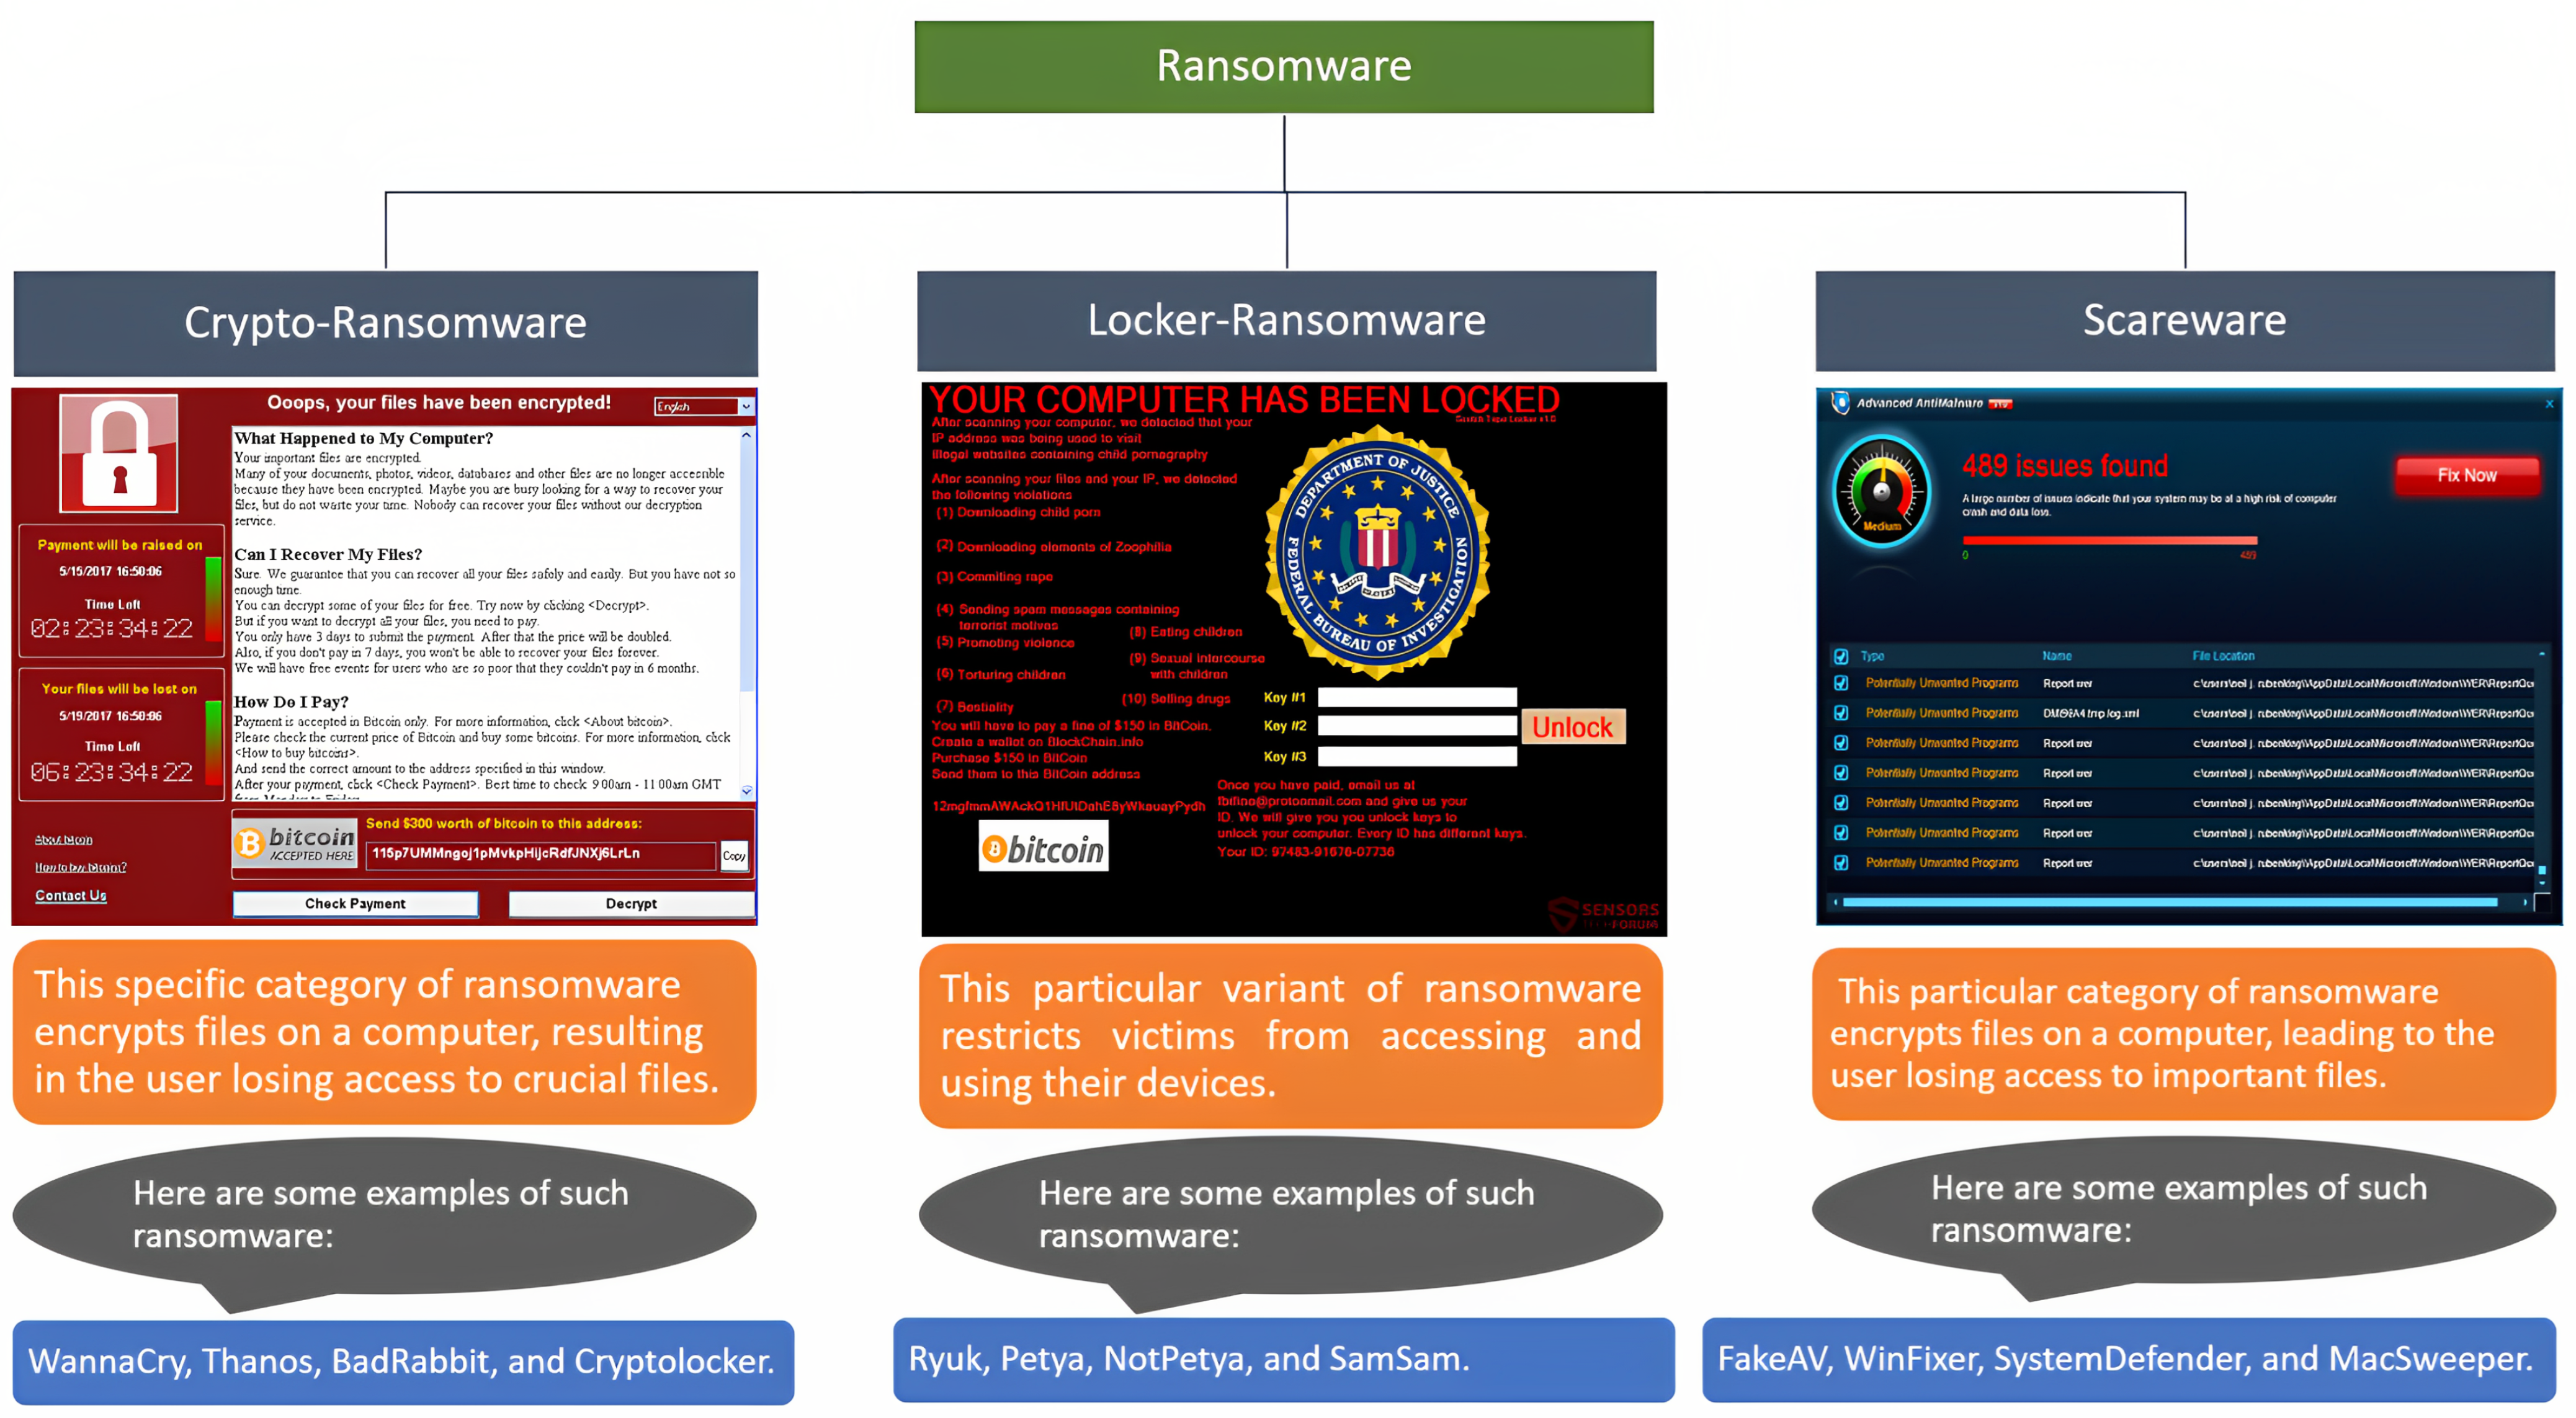 Evolution of the LockBit Ransomware operation relies on new techniques